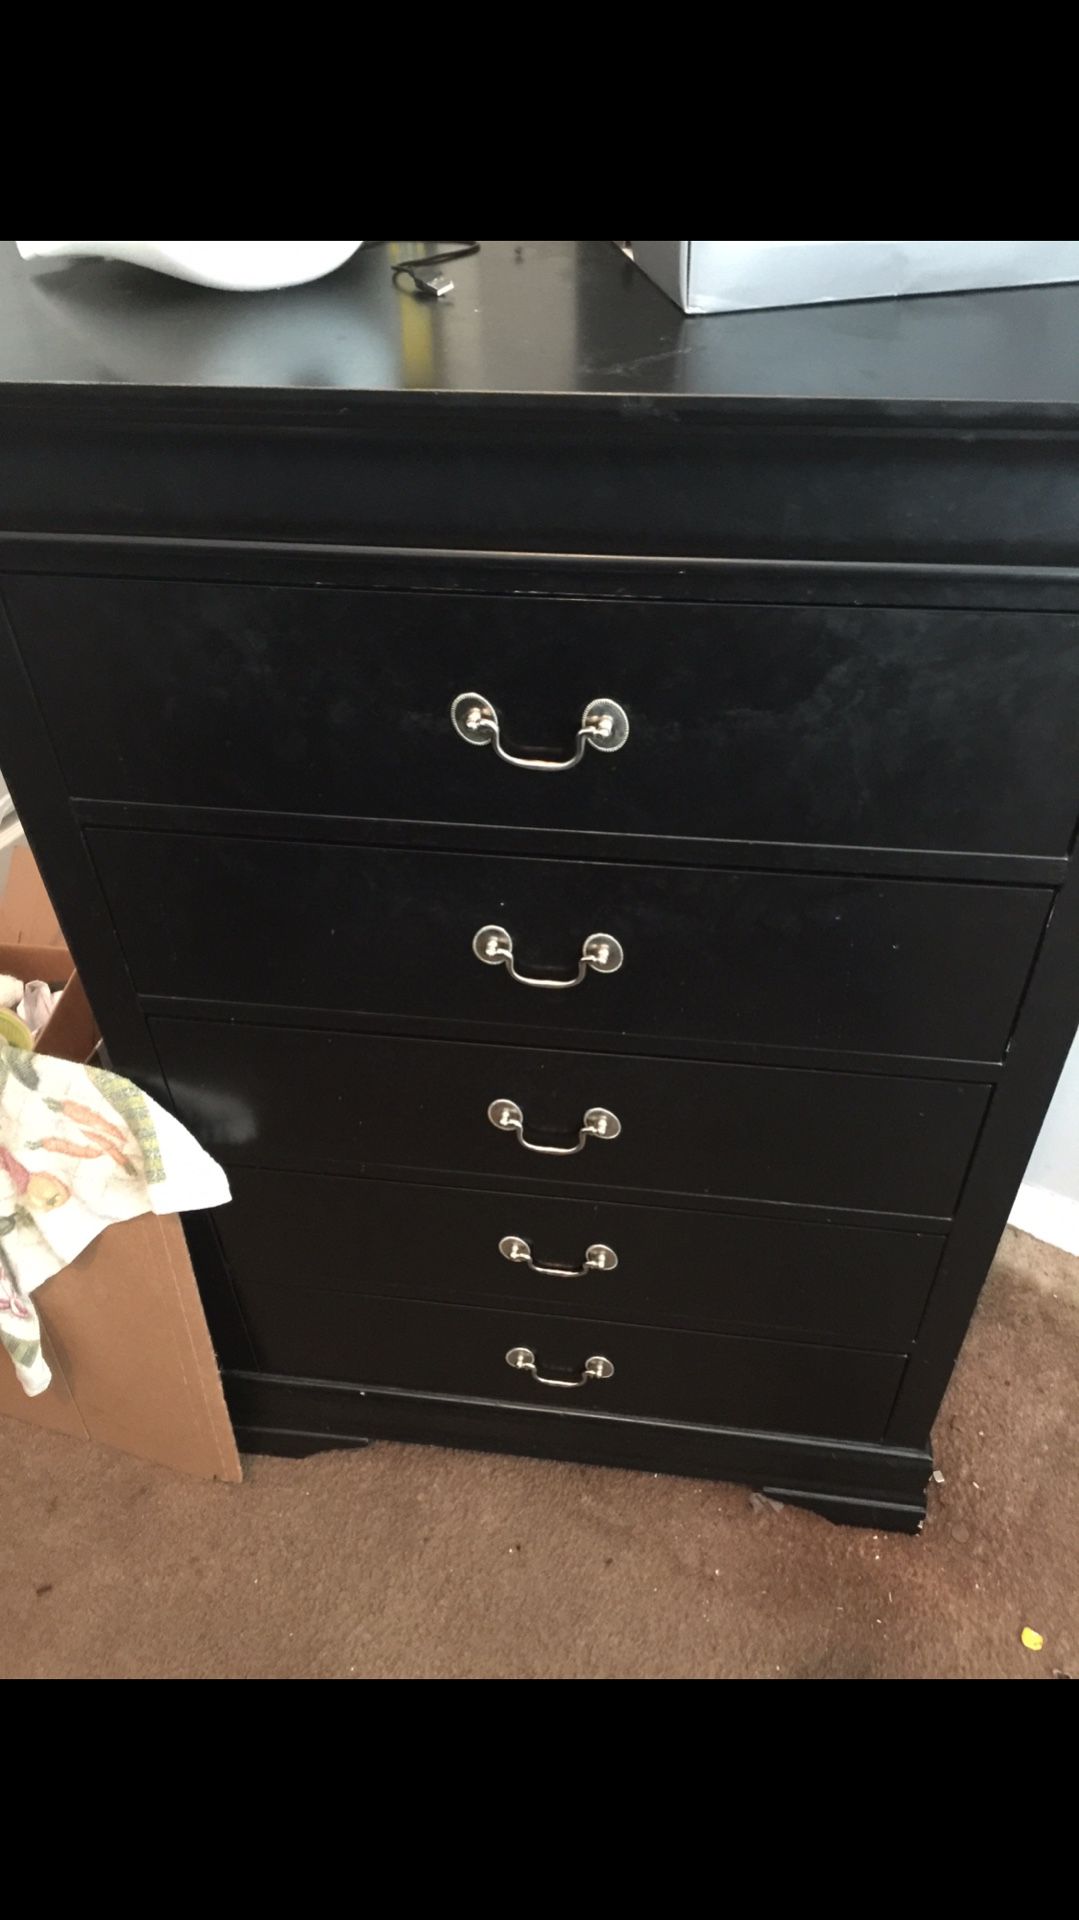 Fullsize bedroom set, in storage now, serious about buying it, cash only no checks, please everything is included. No delivery service,please.